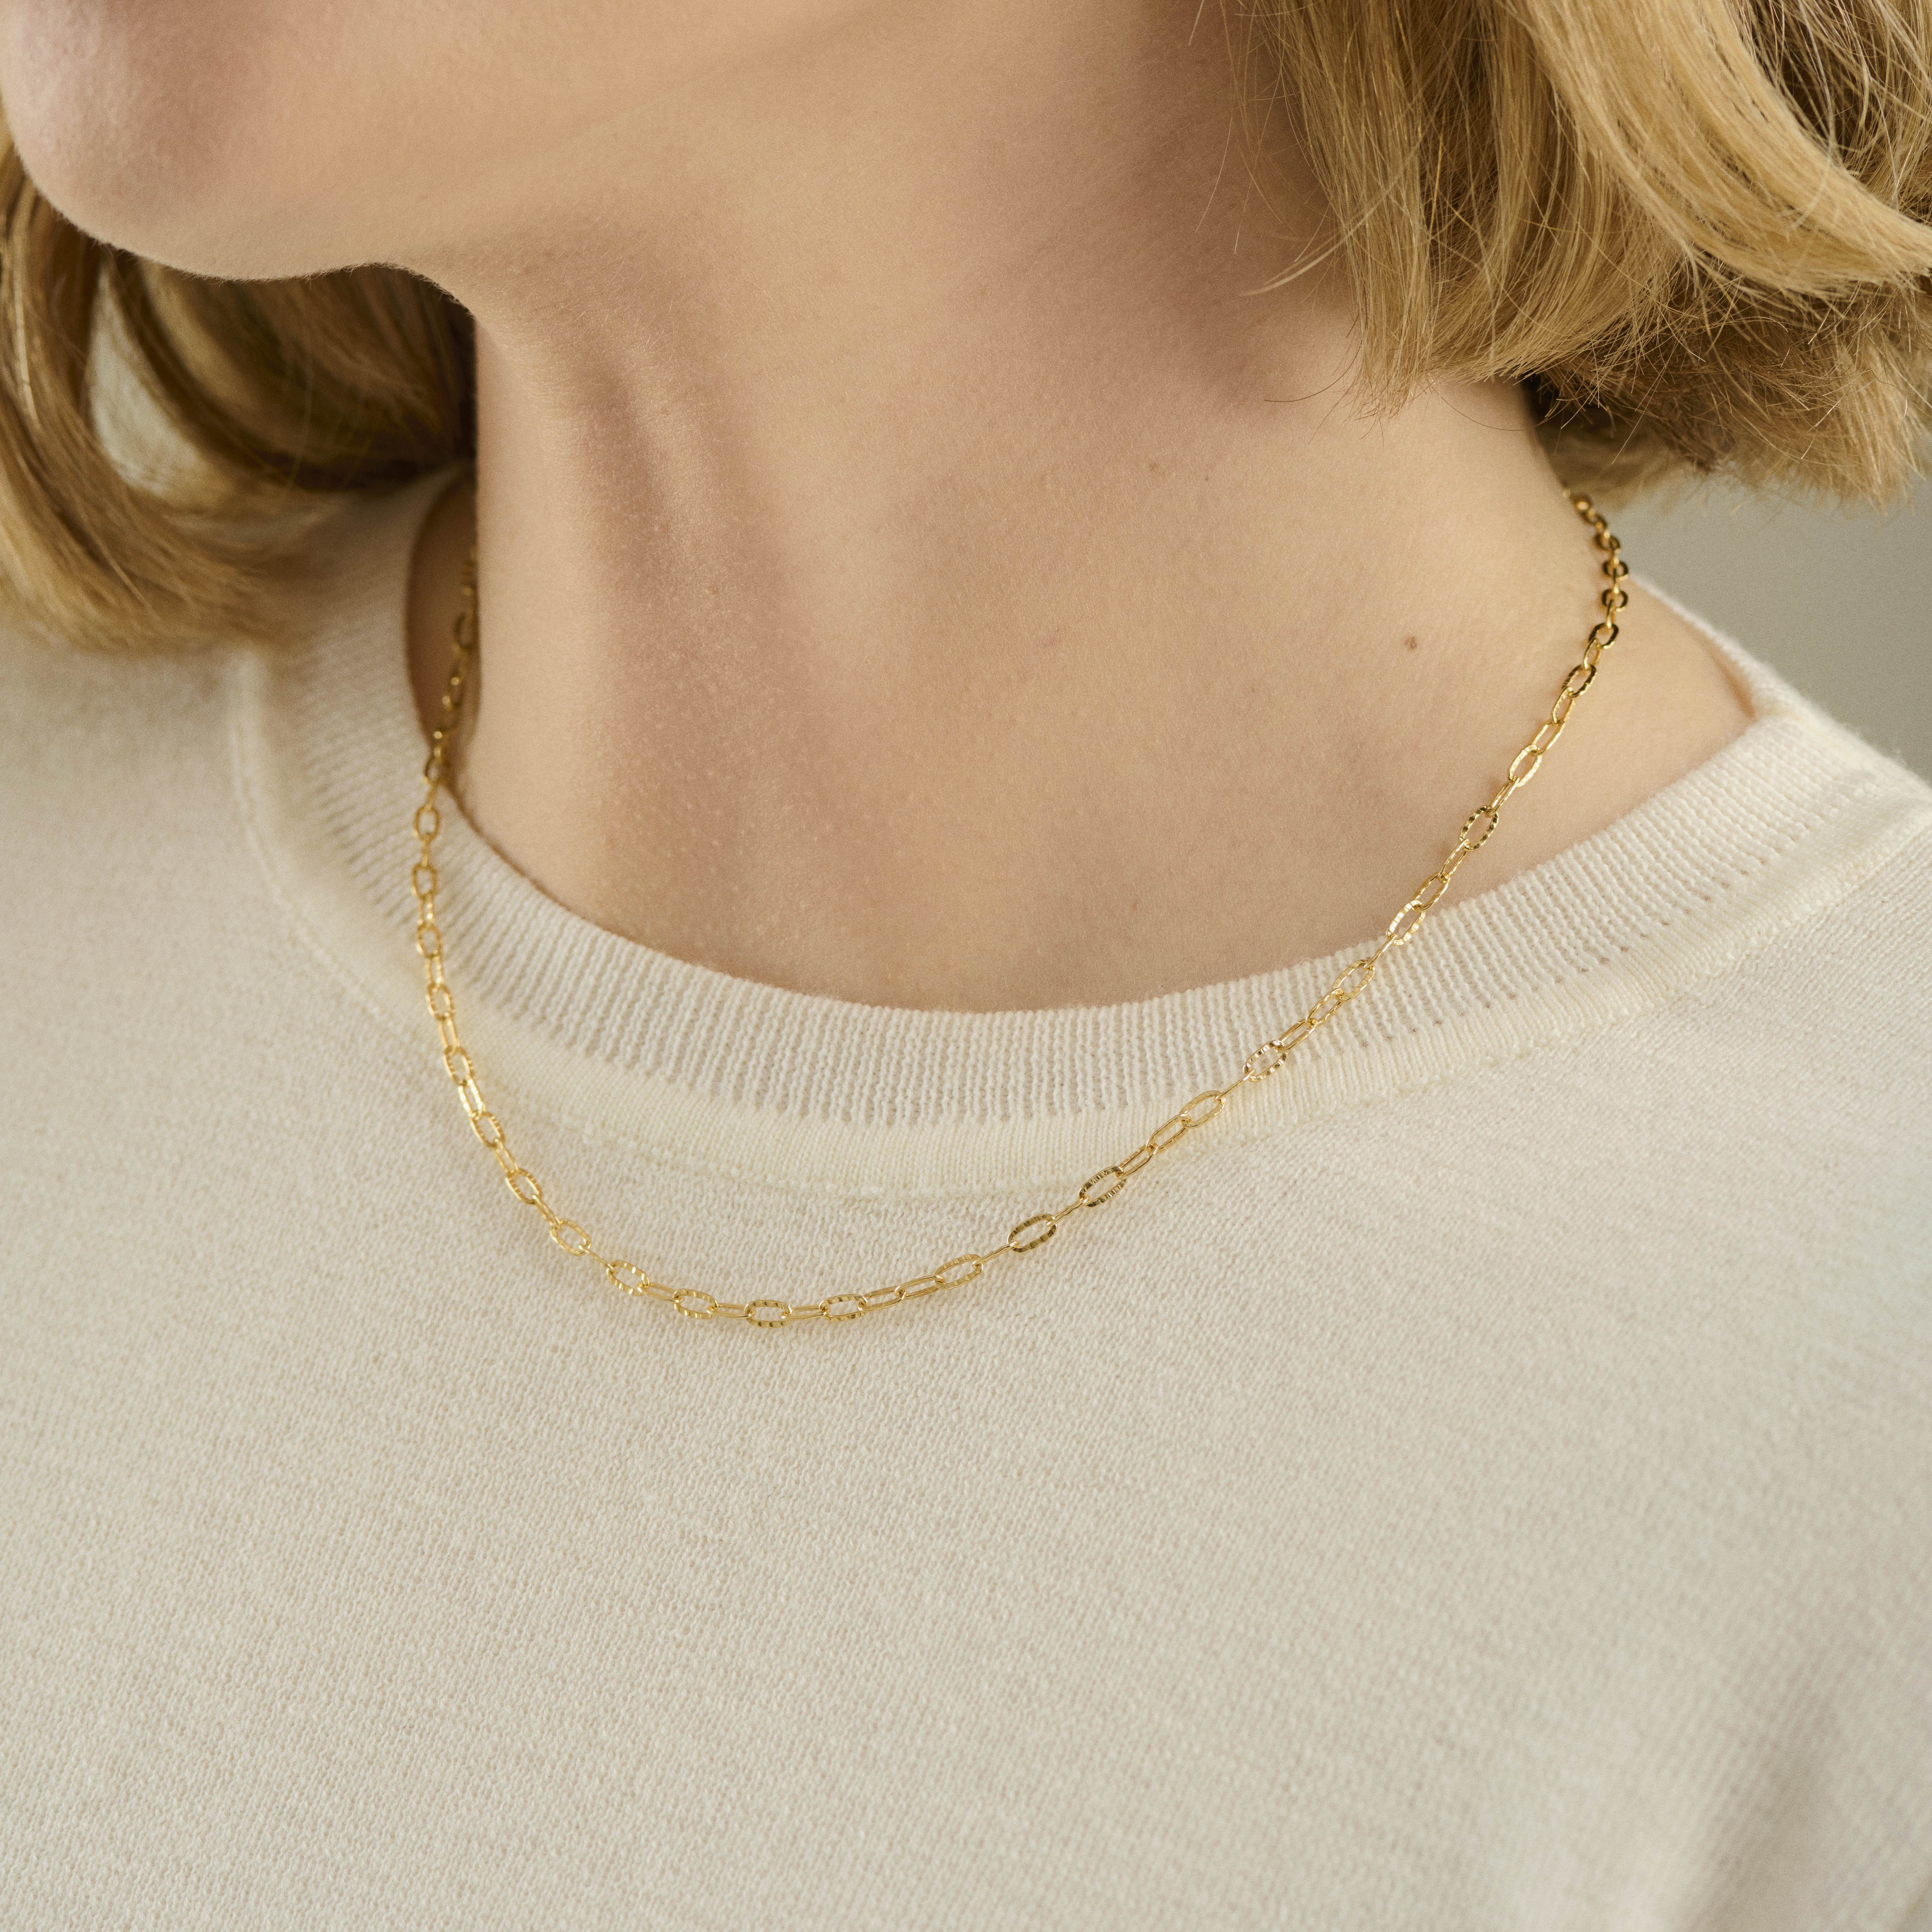 Alba Necklace from Pernille Corydon in Goldplated-Silver Sterling 925